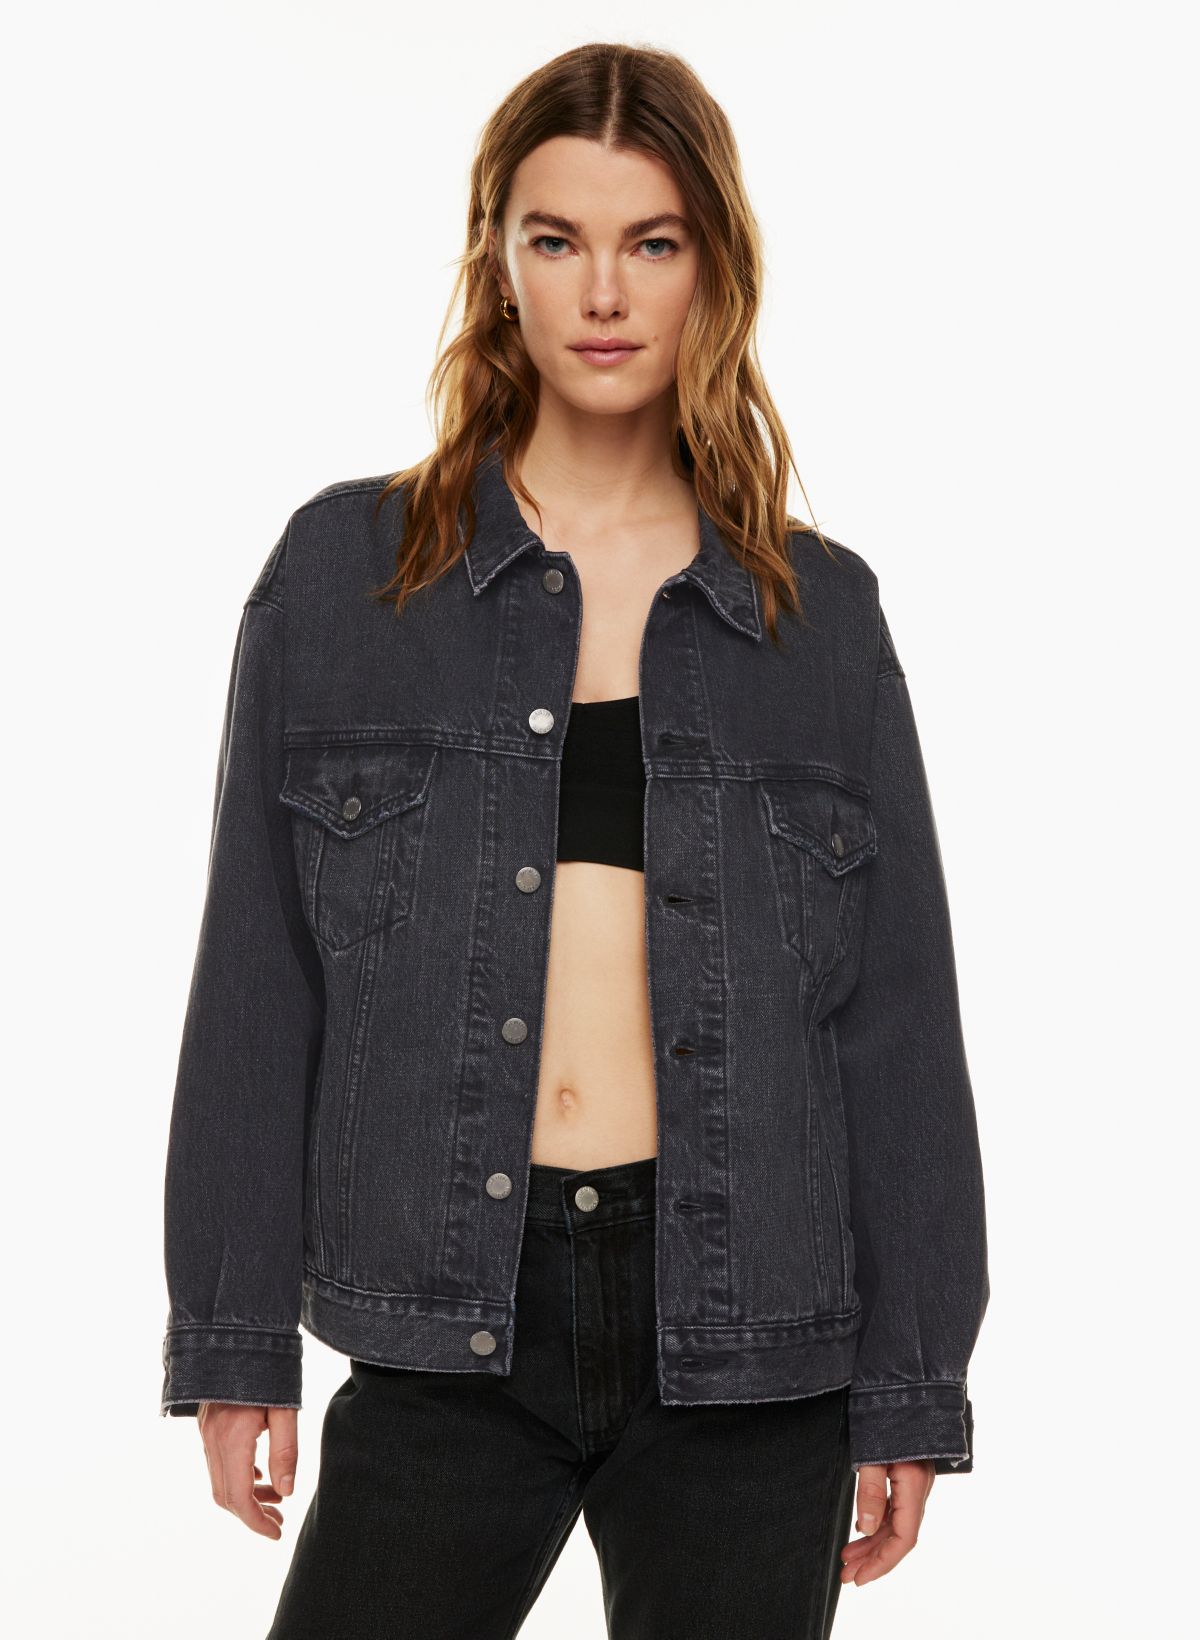 J.Crew Classic Denim Jacket Review: Why We Love It